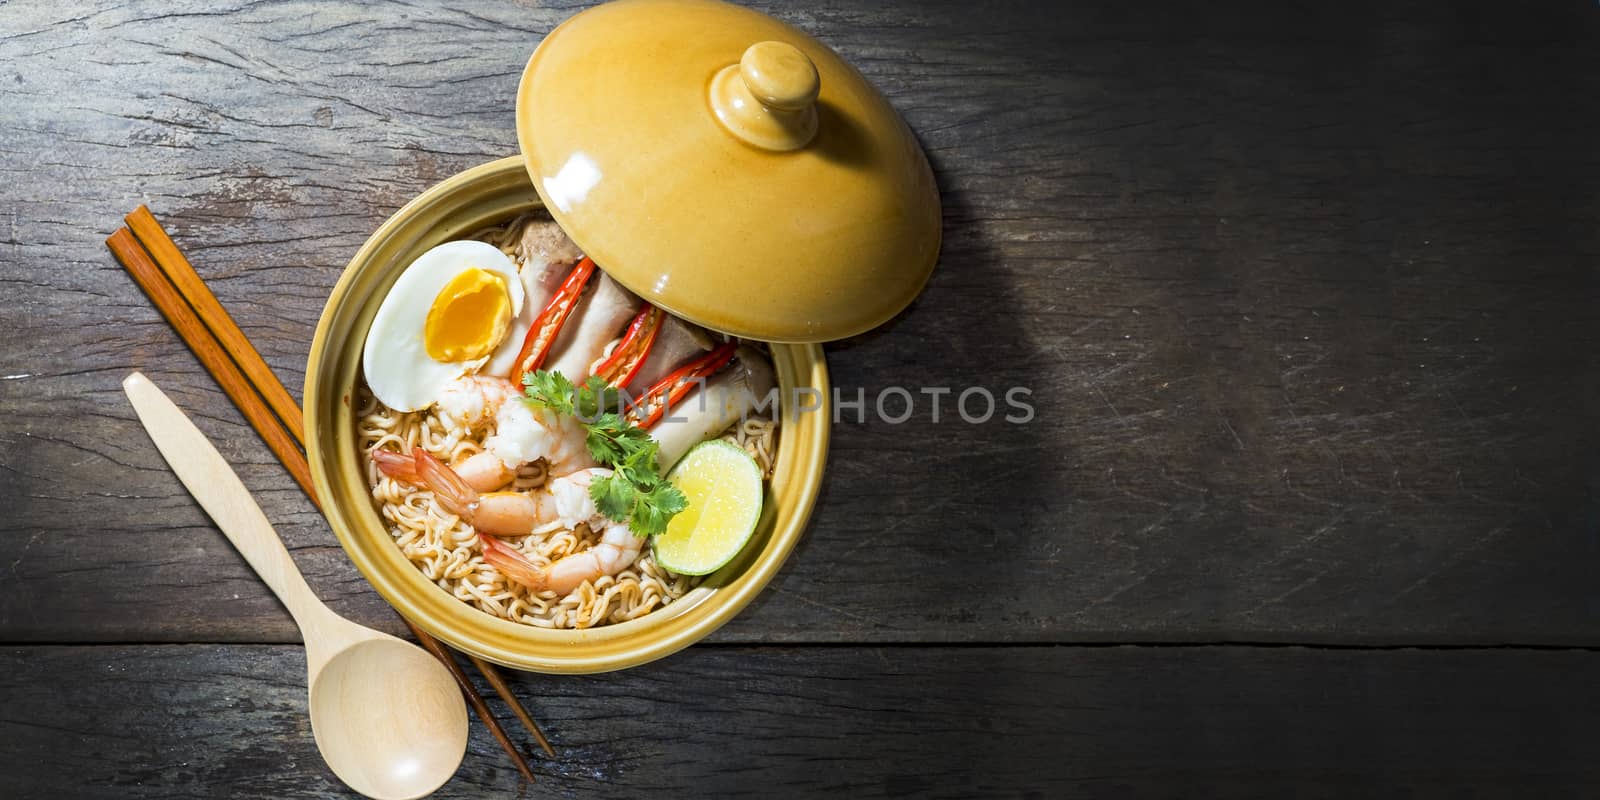 Thai food style noodle, tom yum kung on wood background by Surasak